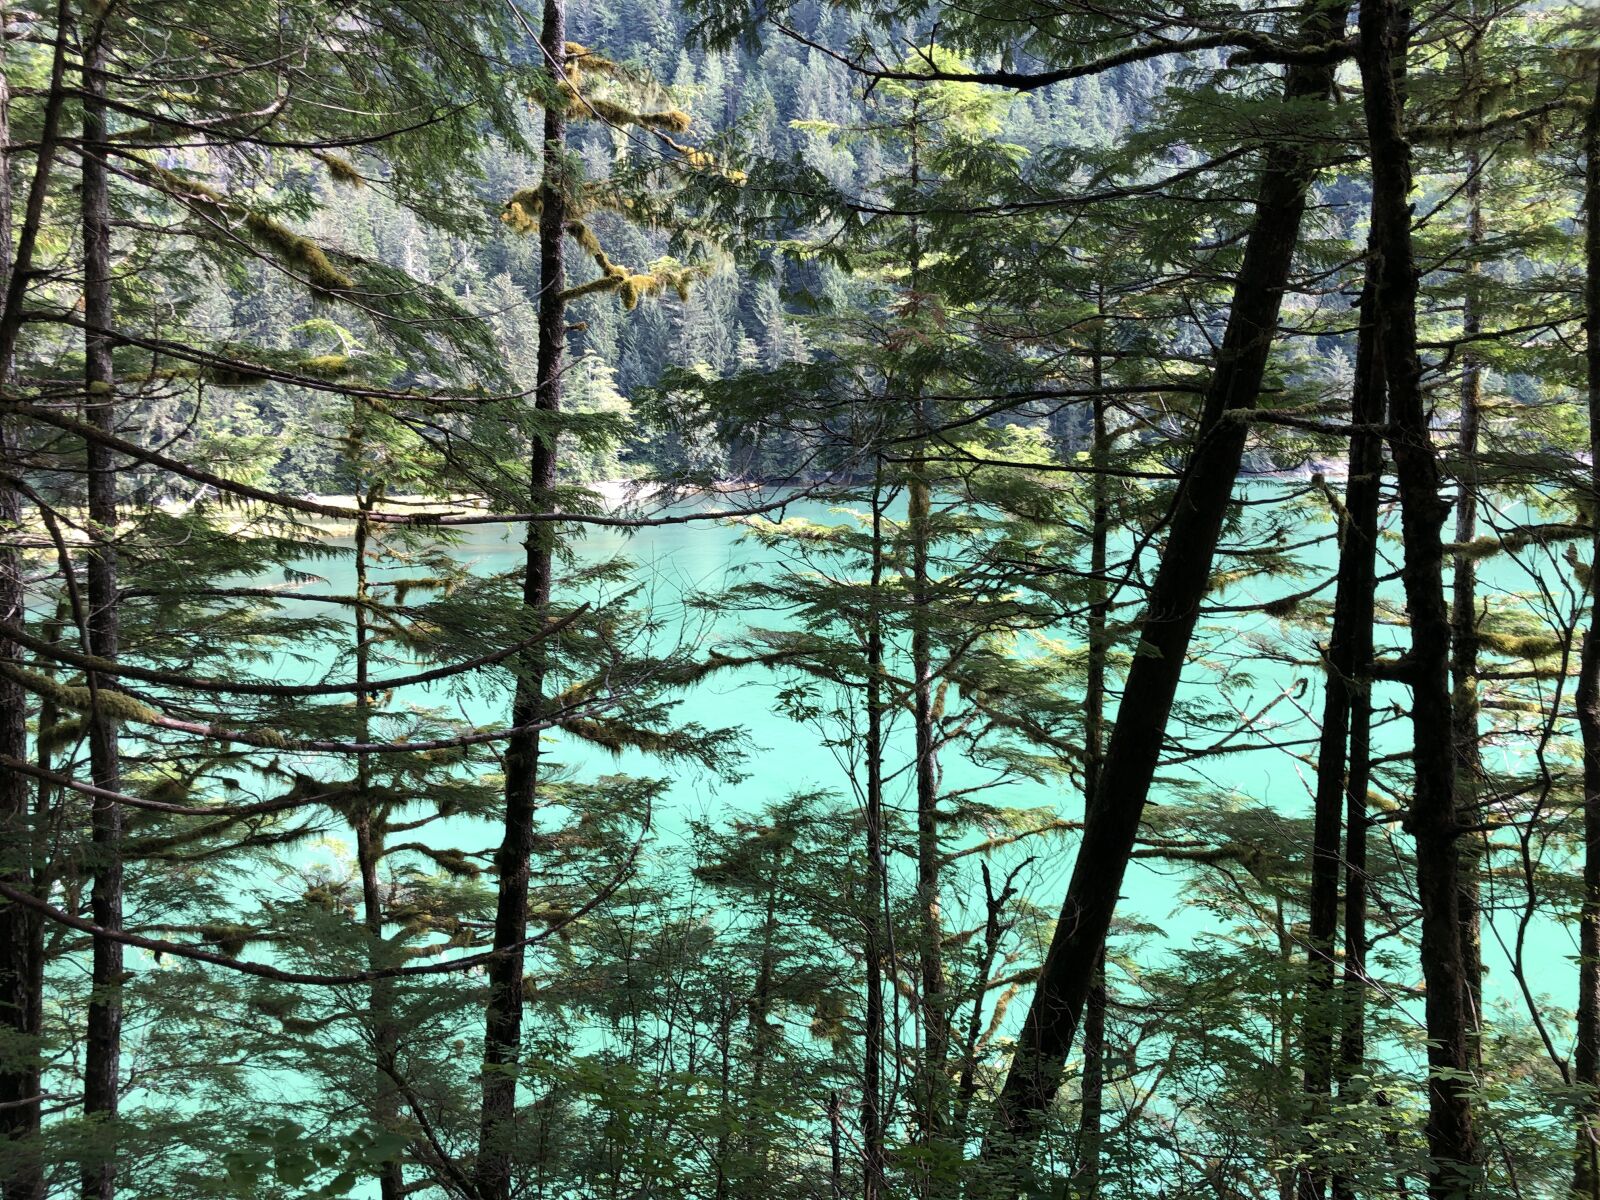 Apple iPhone X sample photo. Forest, emerald water, nature photography